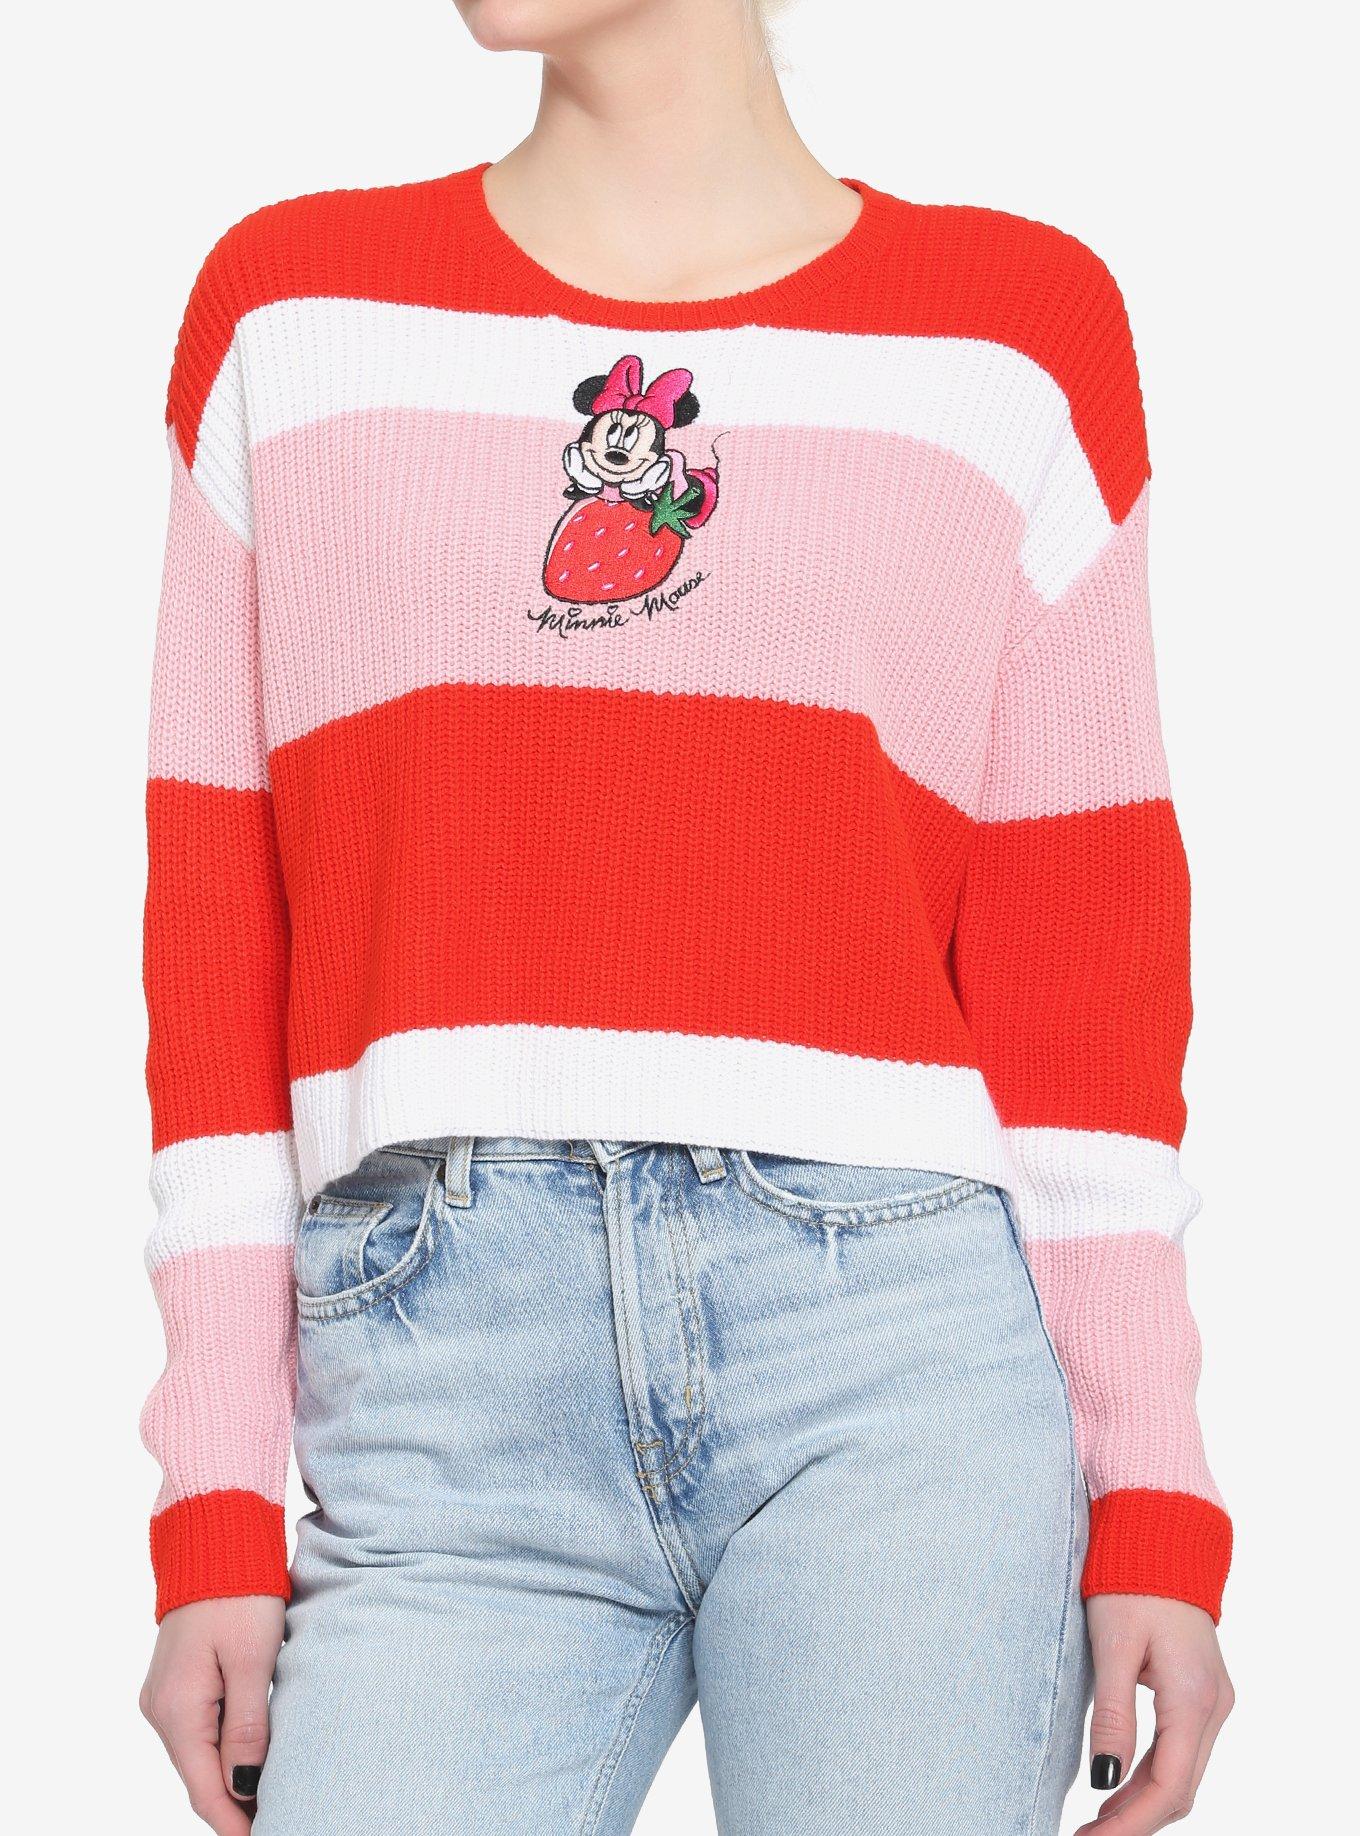 HOT Disney Version Minnie Mouse Louis Vuitton Ugly Sweater